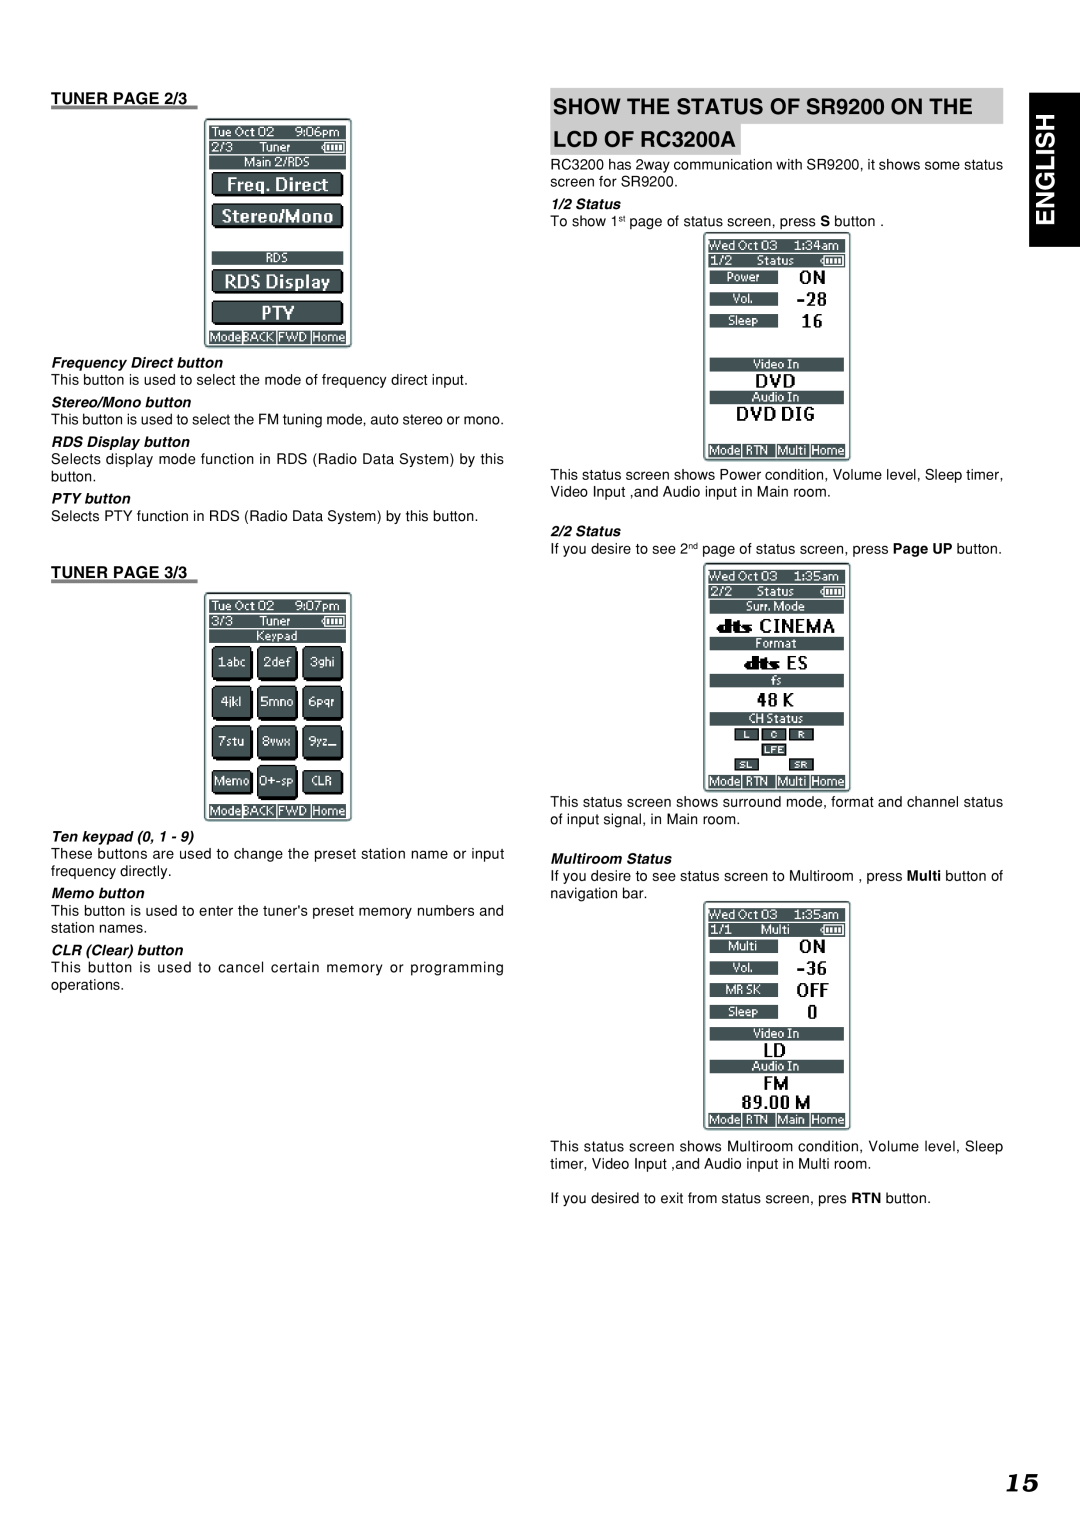 Marantz SR9200 English, TUNER PAGE 2/3, TUNER PAGE 3/3, Frequency Direct button, Stereo/Mono button, RDS Display button 